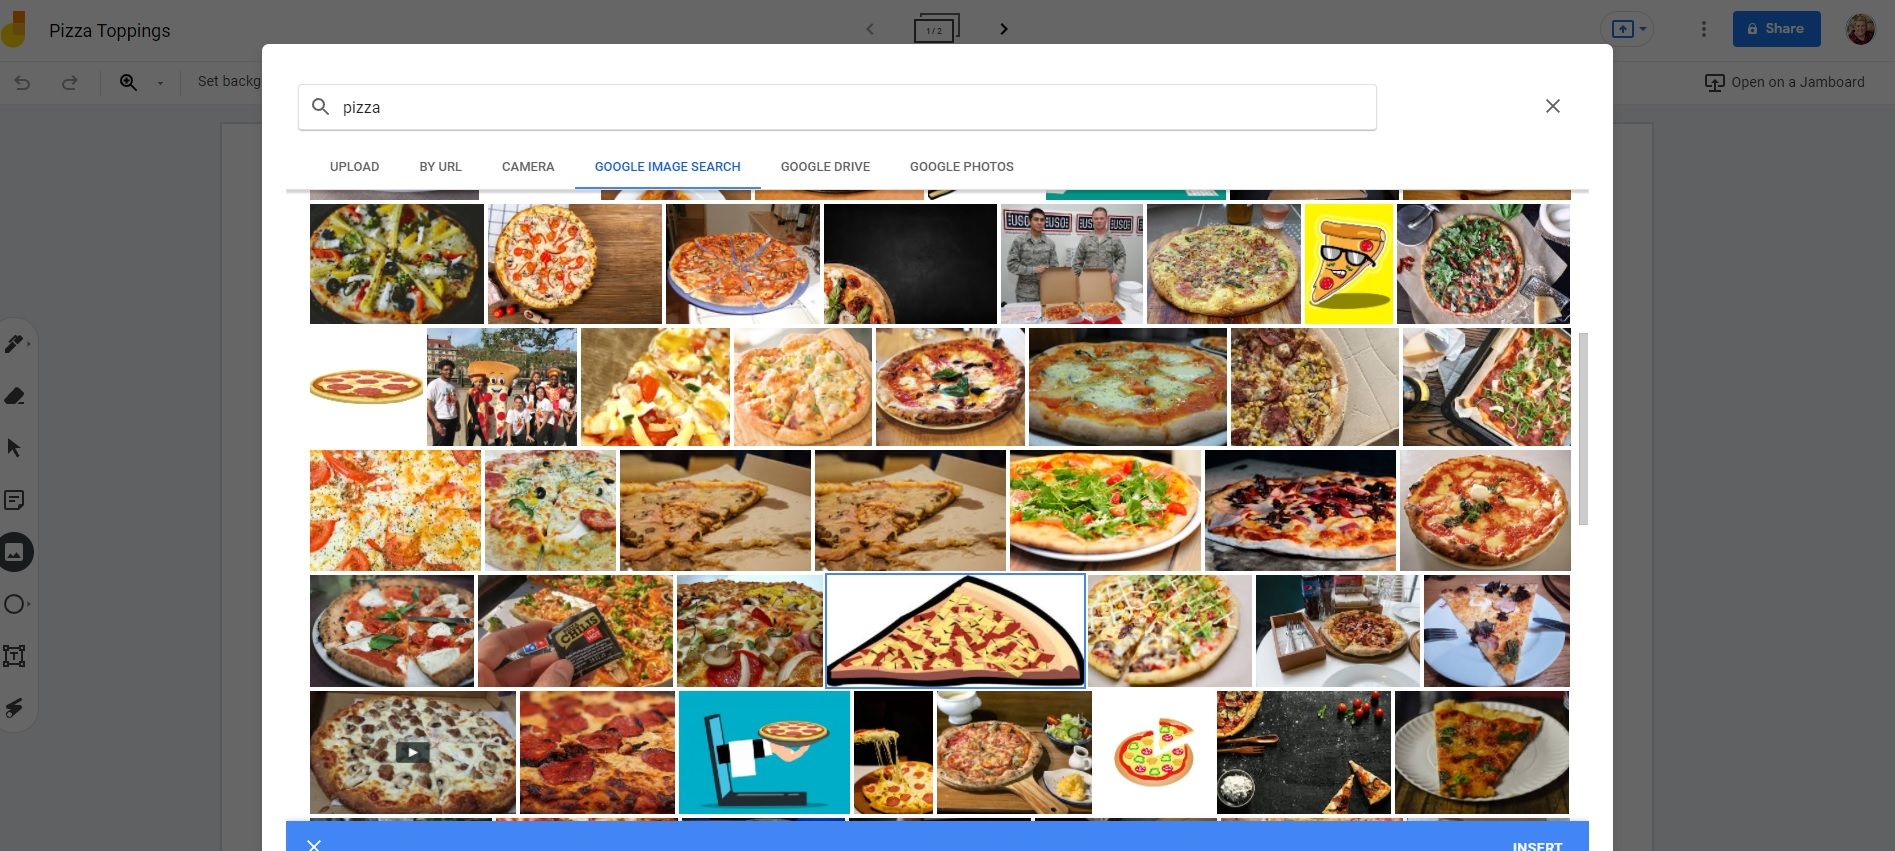 Image shows using Google Image Search inside Google Jamboard